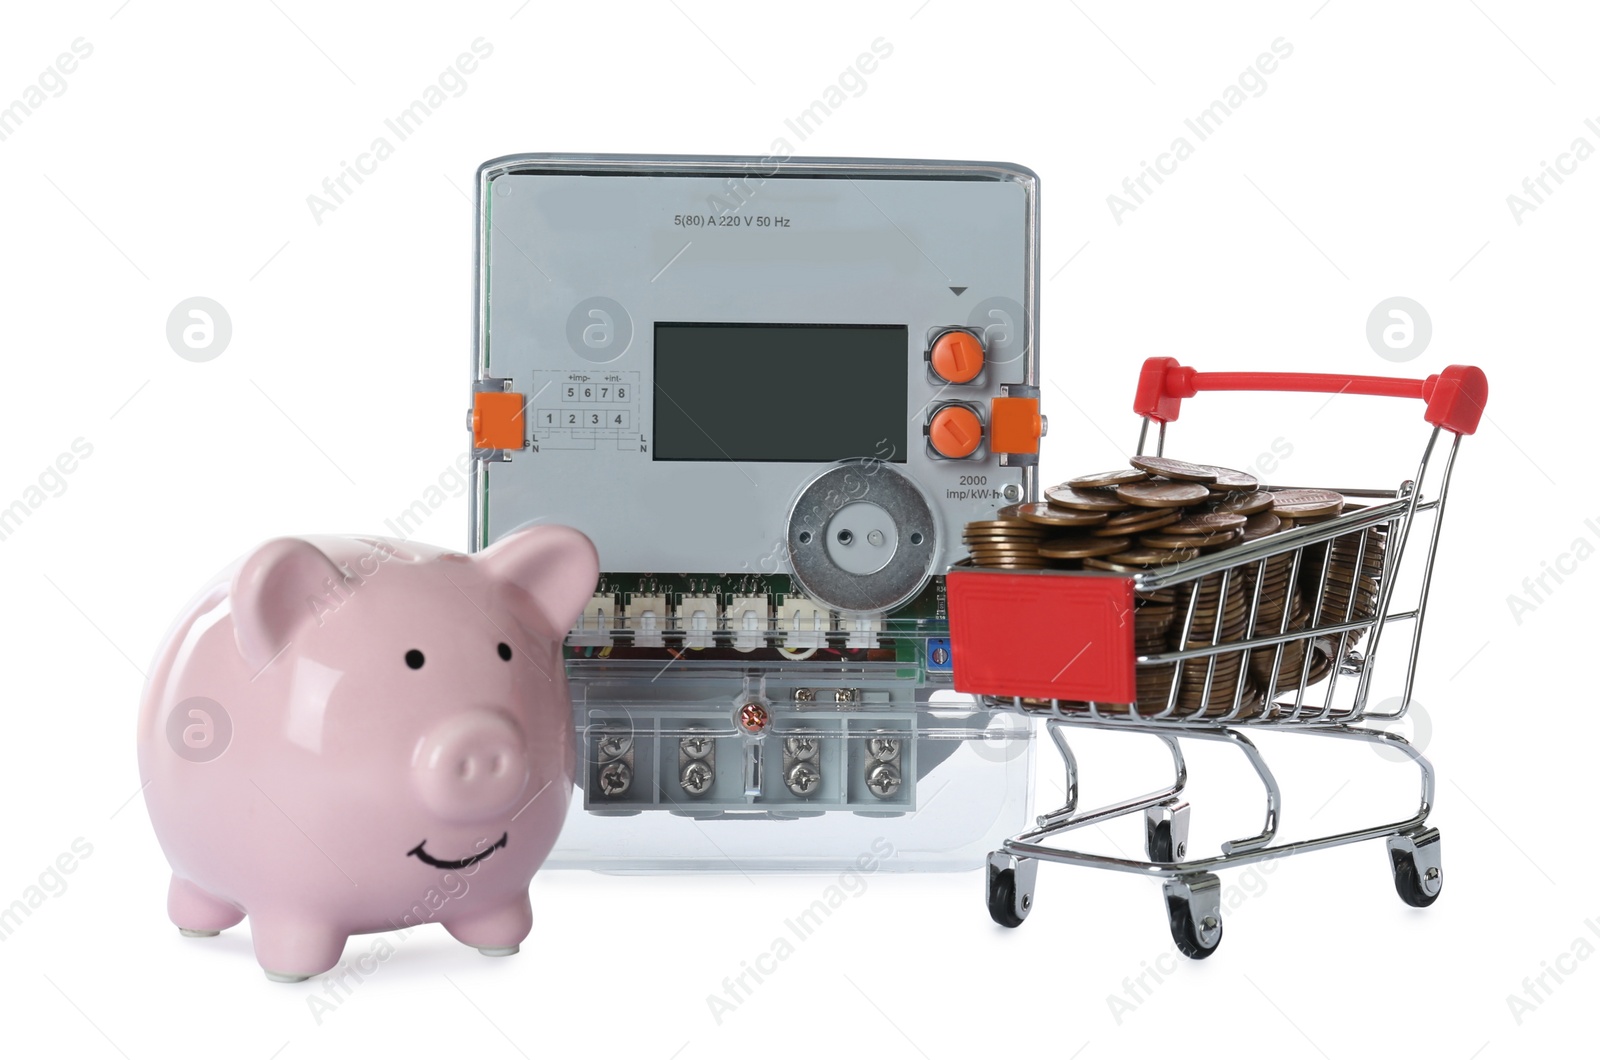 Photo of Electricity meter, pink piggy bank and small shopping cart with coins on white background